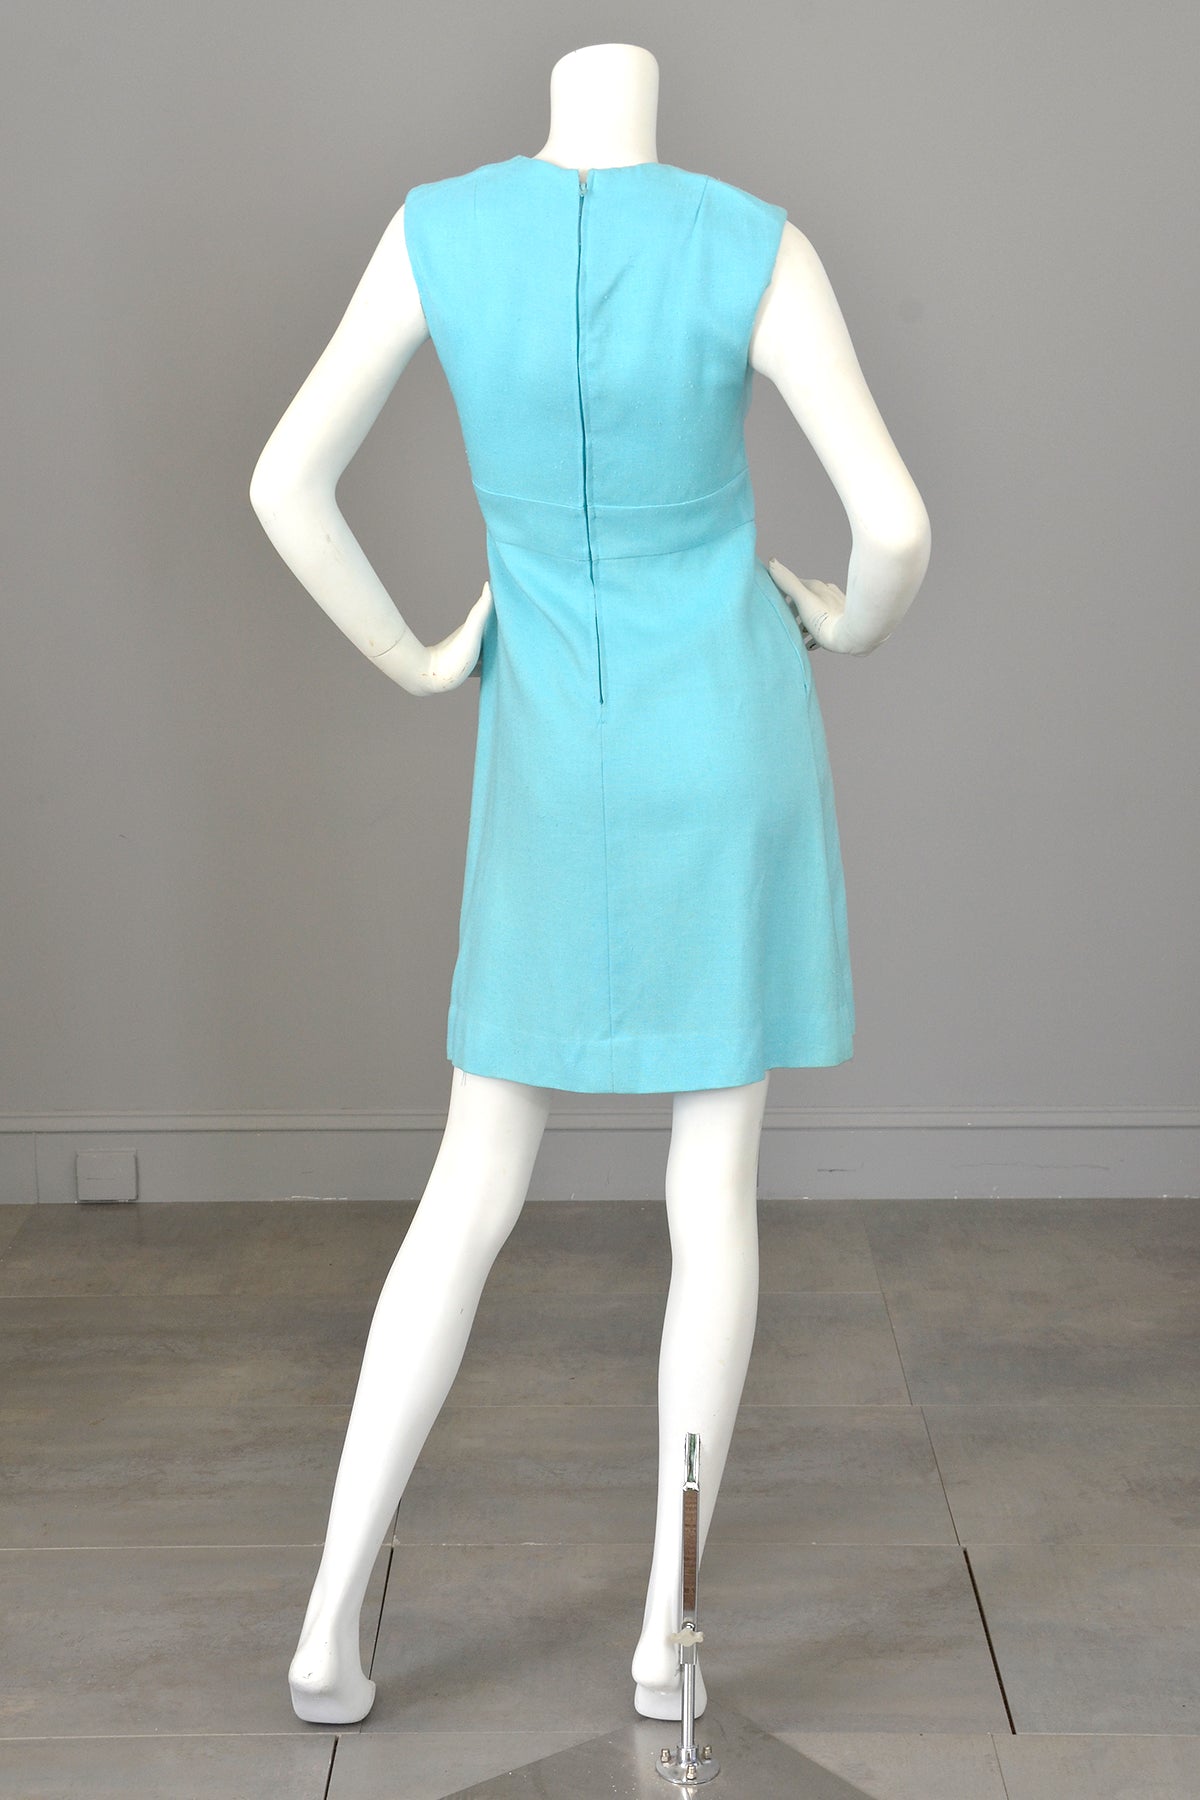 1970s Sky Blue Scooter Dress and Matching Crochet Lace Blouse Jacket